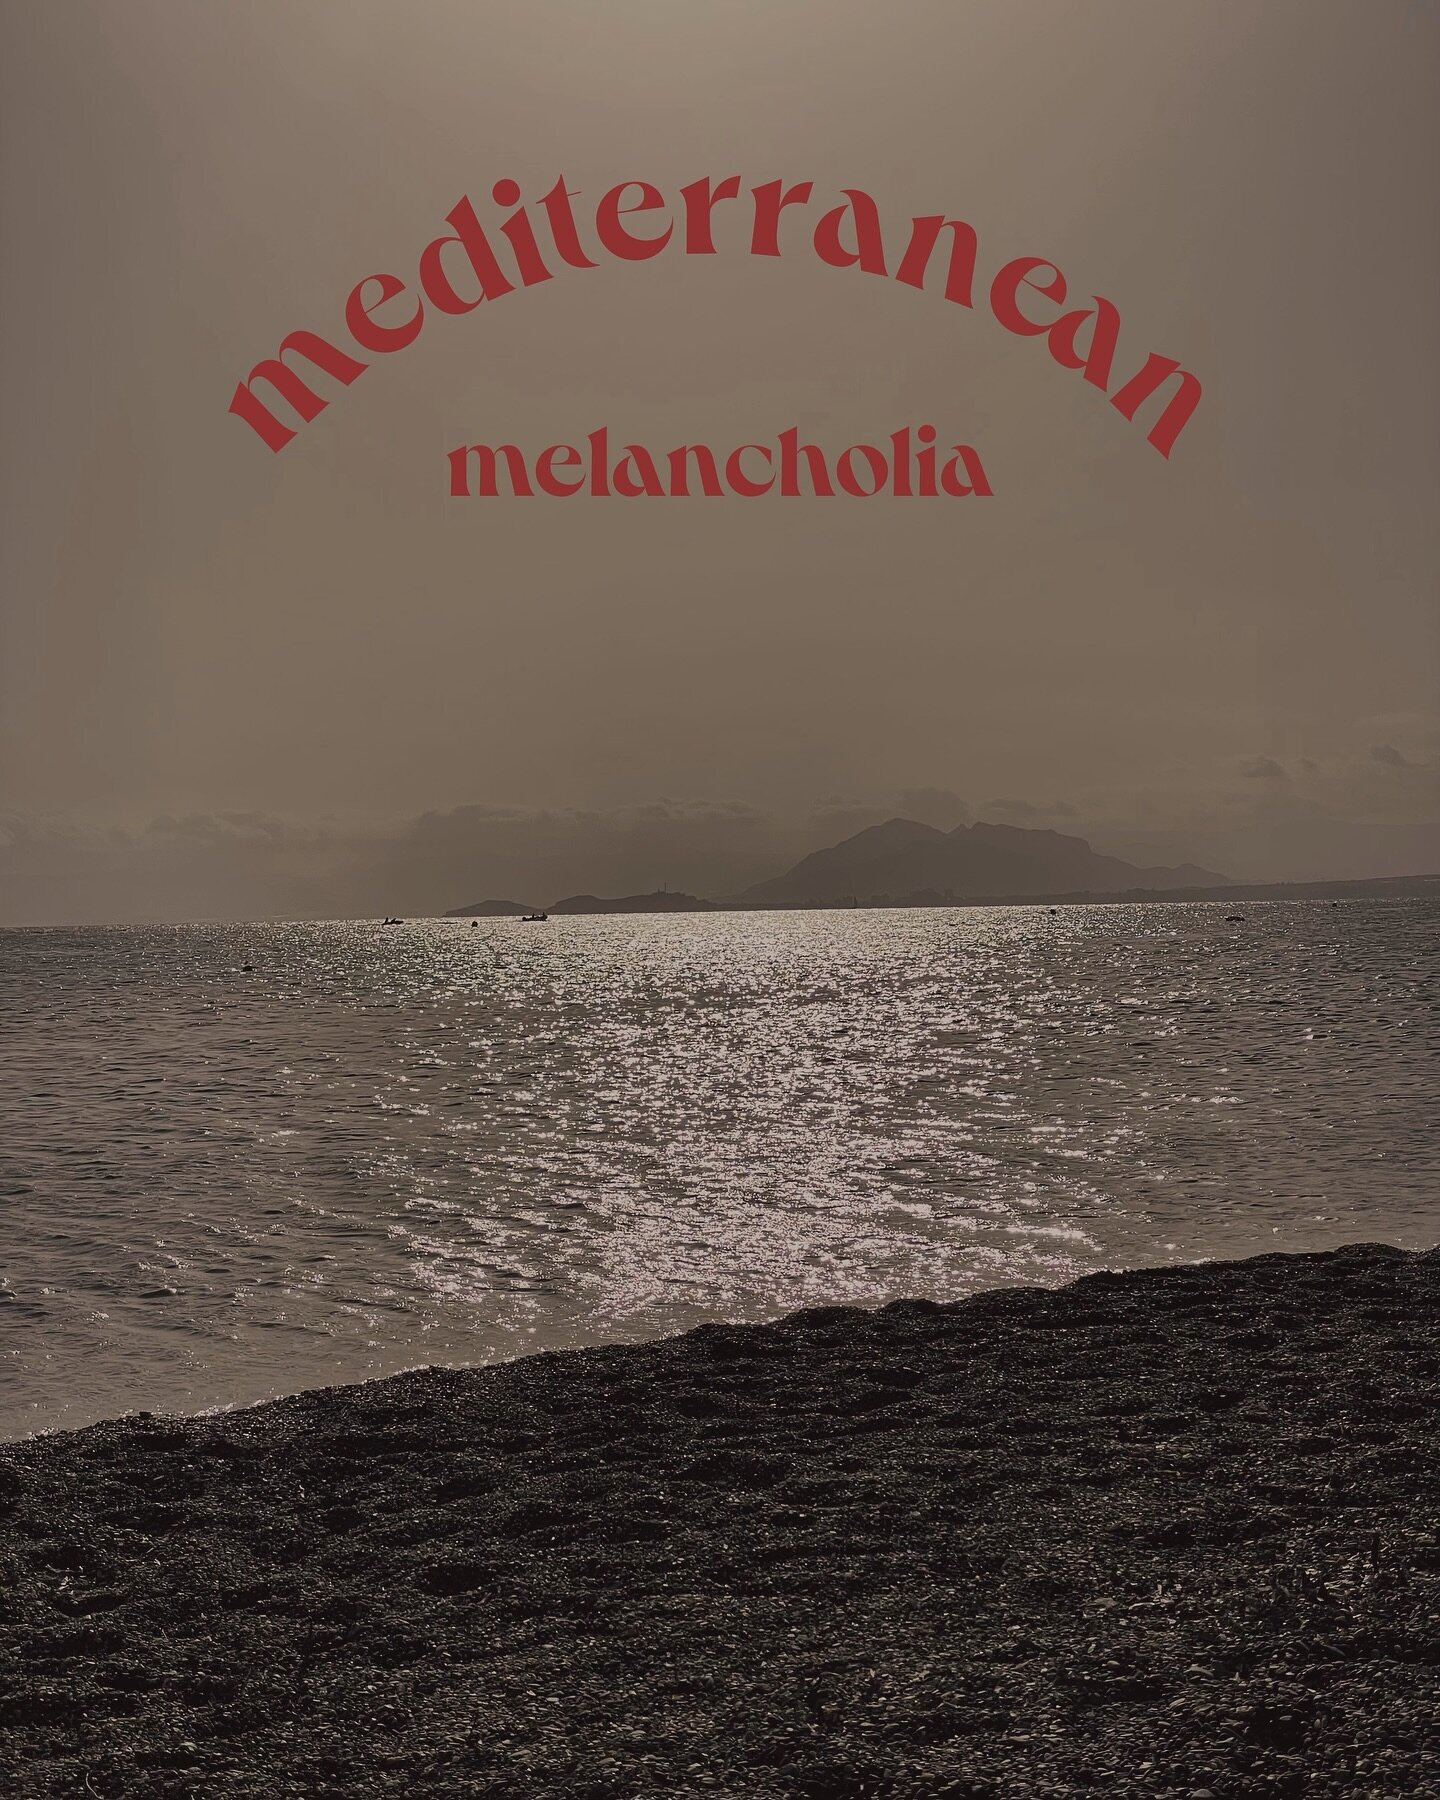 While it&rsquo;s grey in grey in northern Europe and days are getting shorter, we&rsquo;re already dreaming about summer 2024 &ndash; lazy beach-days, briney olives, cold sangria, long days and balmy mediterranean nights 🌝

#mediterraneanmelancholia